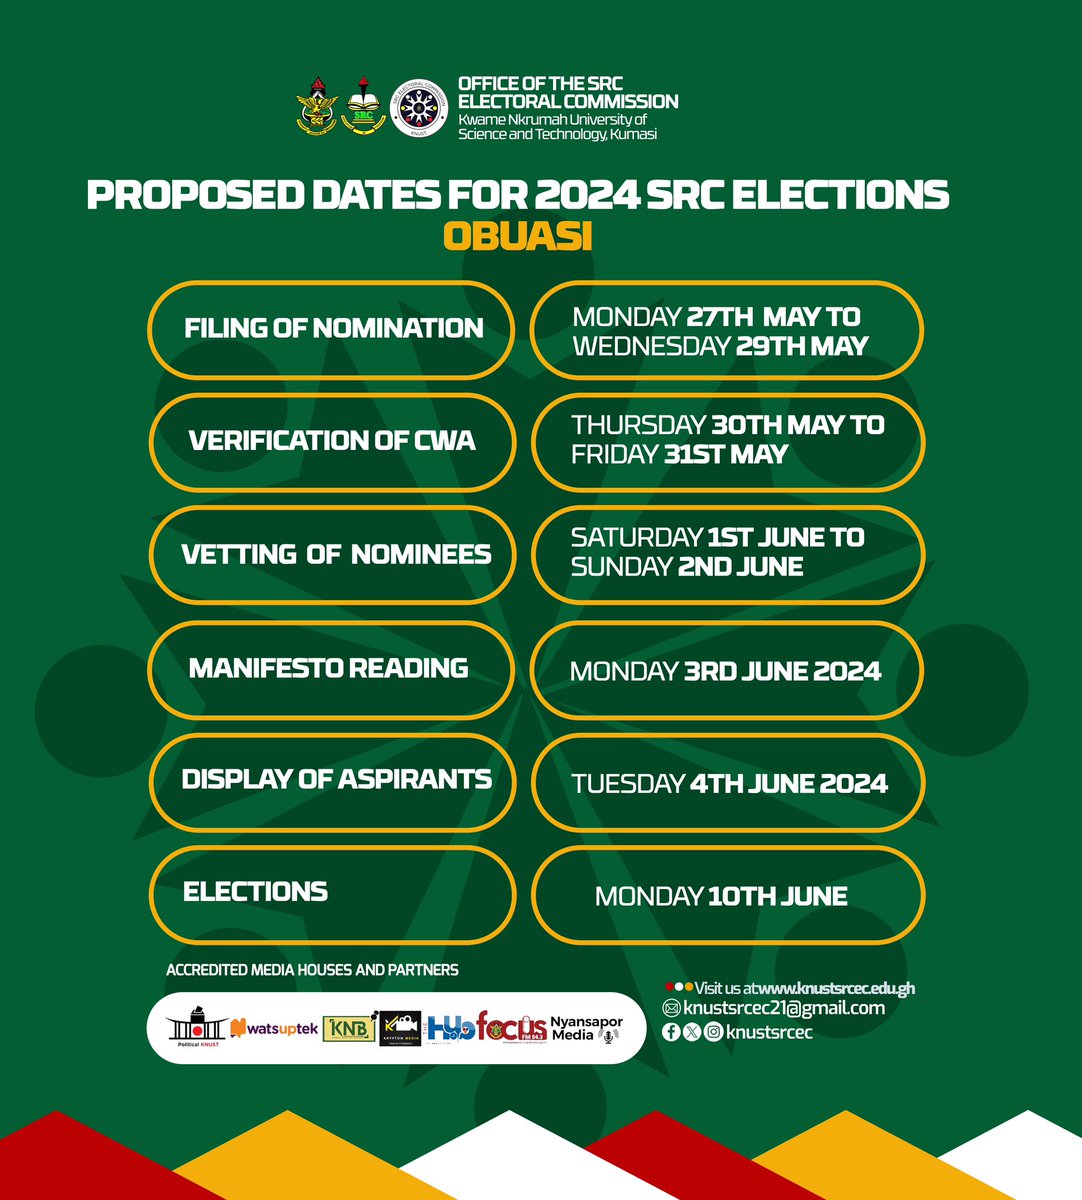 Here are the proposed dates and timelines for the KNUST Obuasi Campus elections. Filing of nomination forms begin on 27th May, 2024 and the Elections take place on Monday, 10th June, 2024. #KNUSTNewsFile